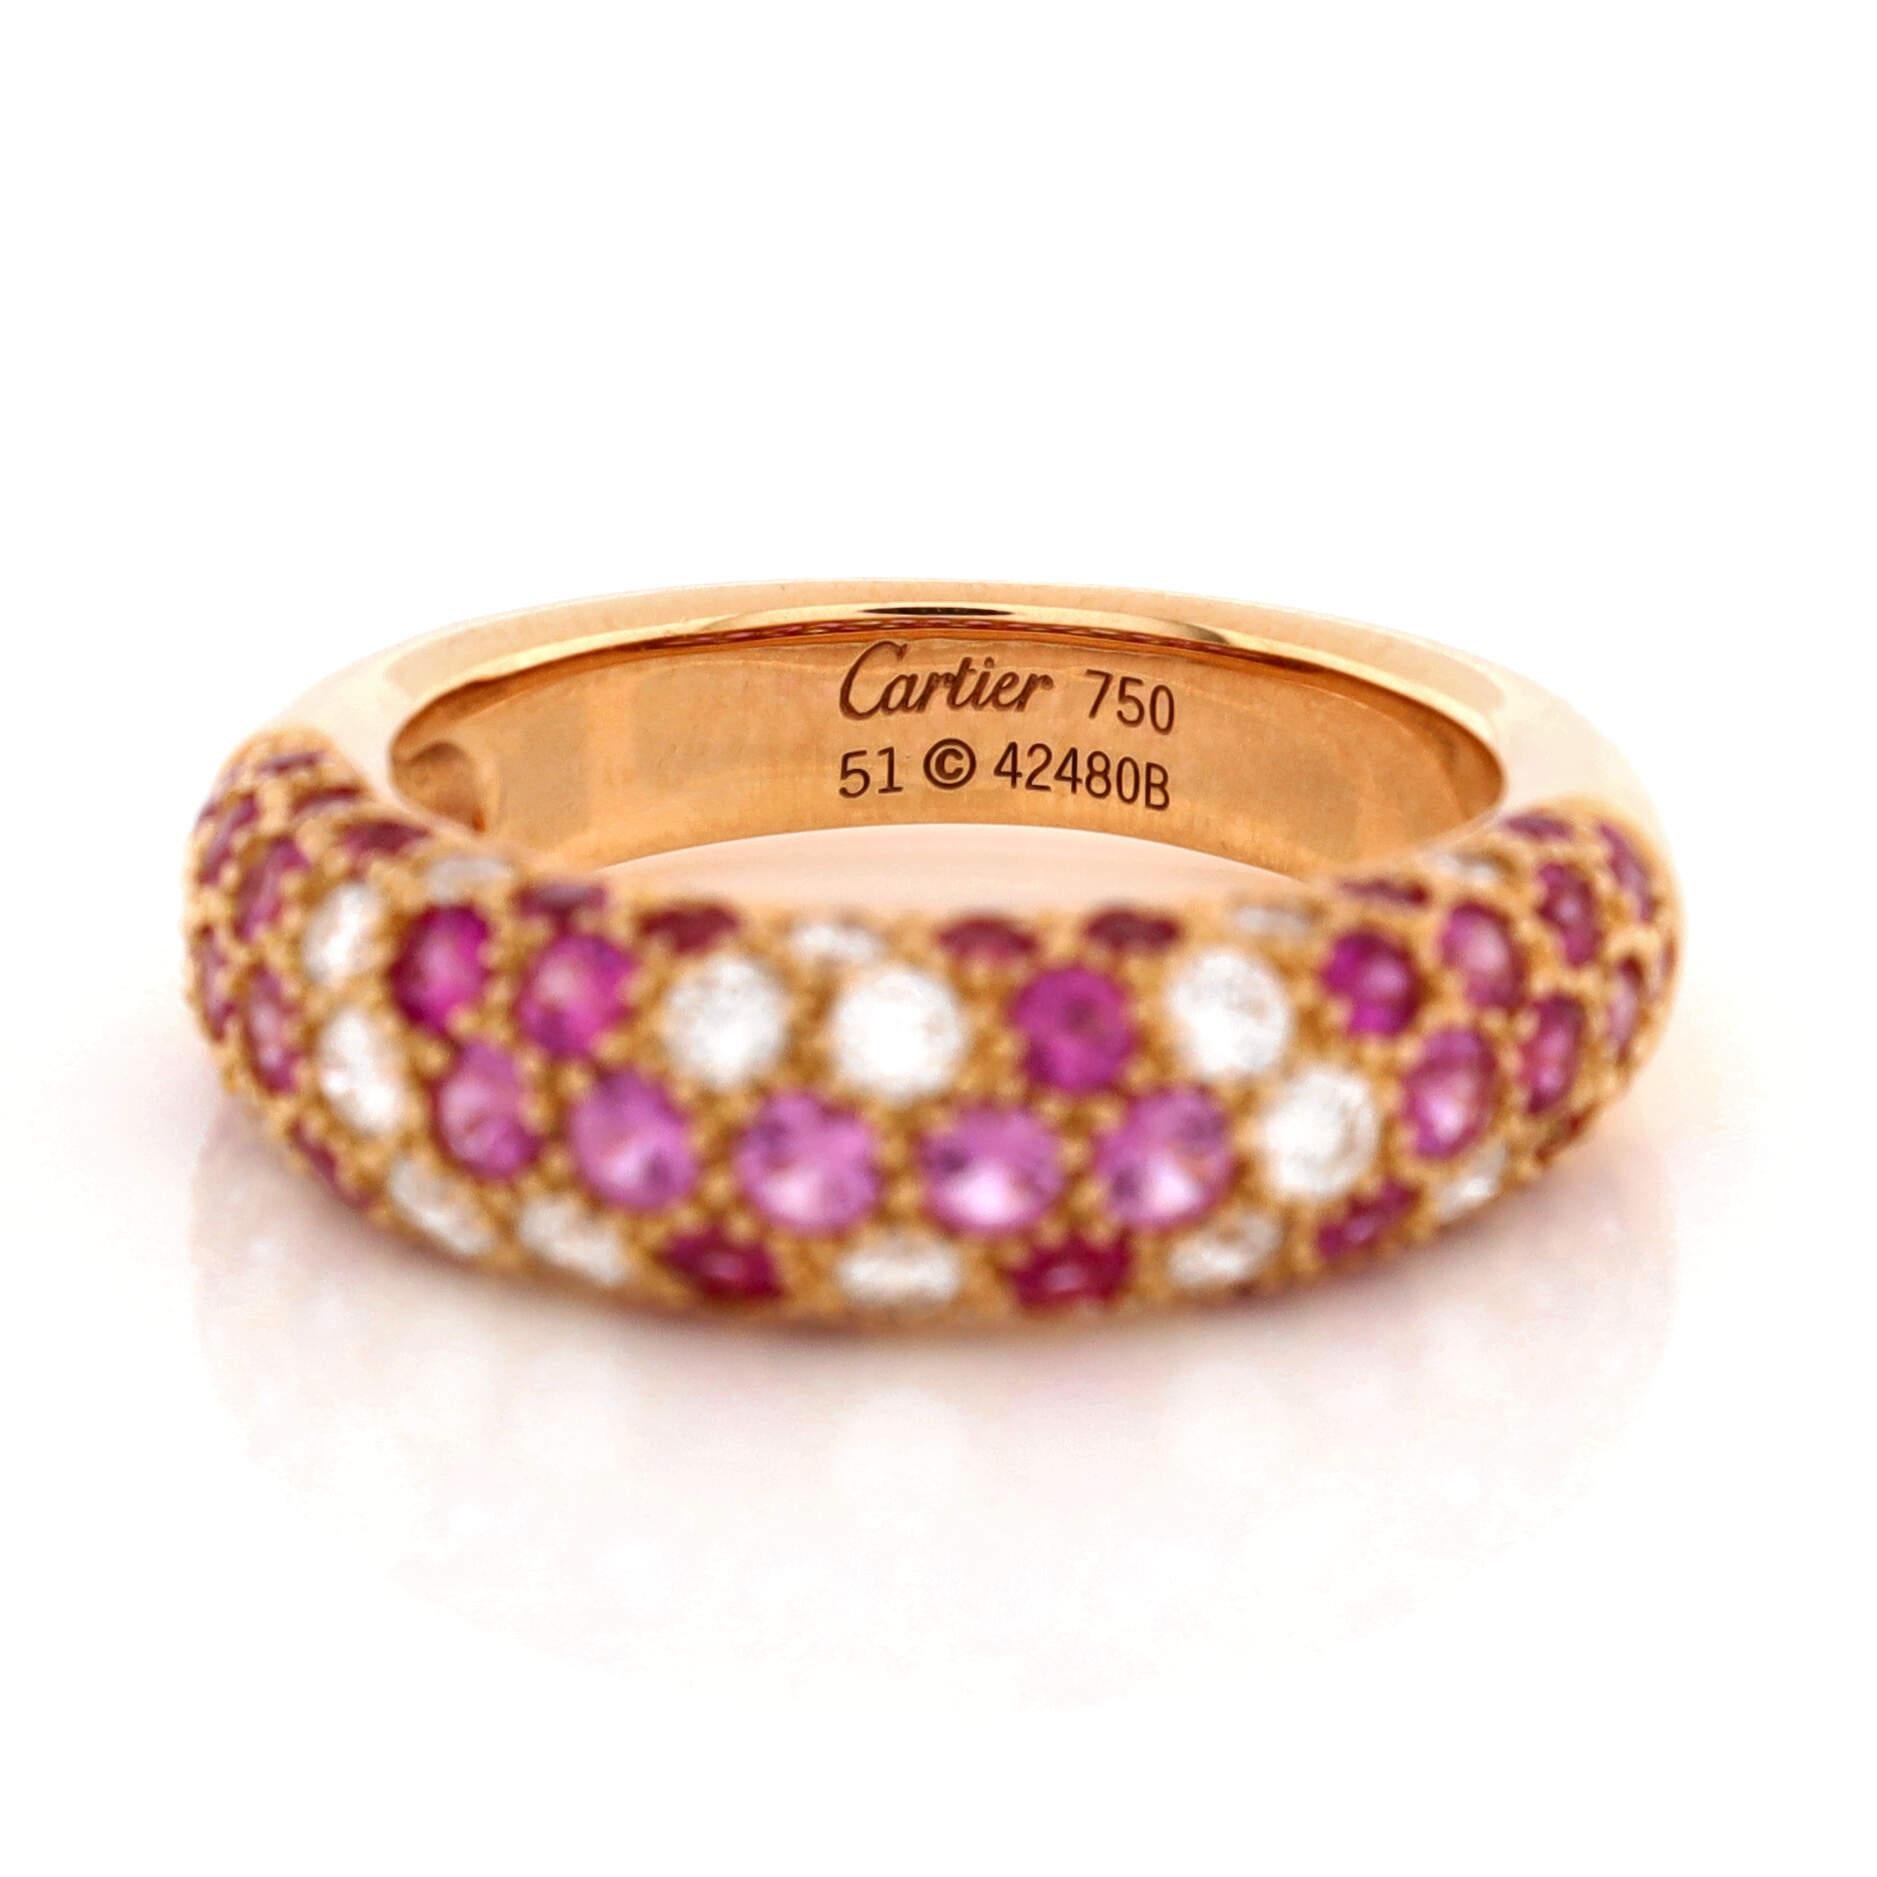 Women's or Men's Cartier Mimi Pave Band Ring 18k Rose Gold with Sapphires and Diamonds